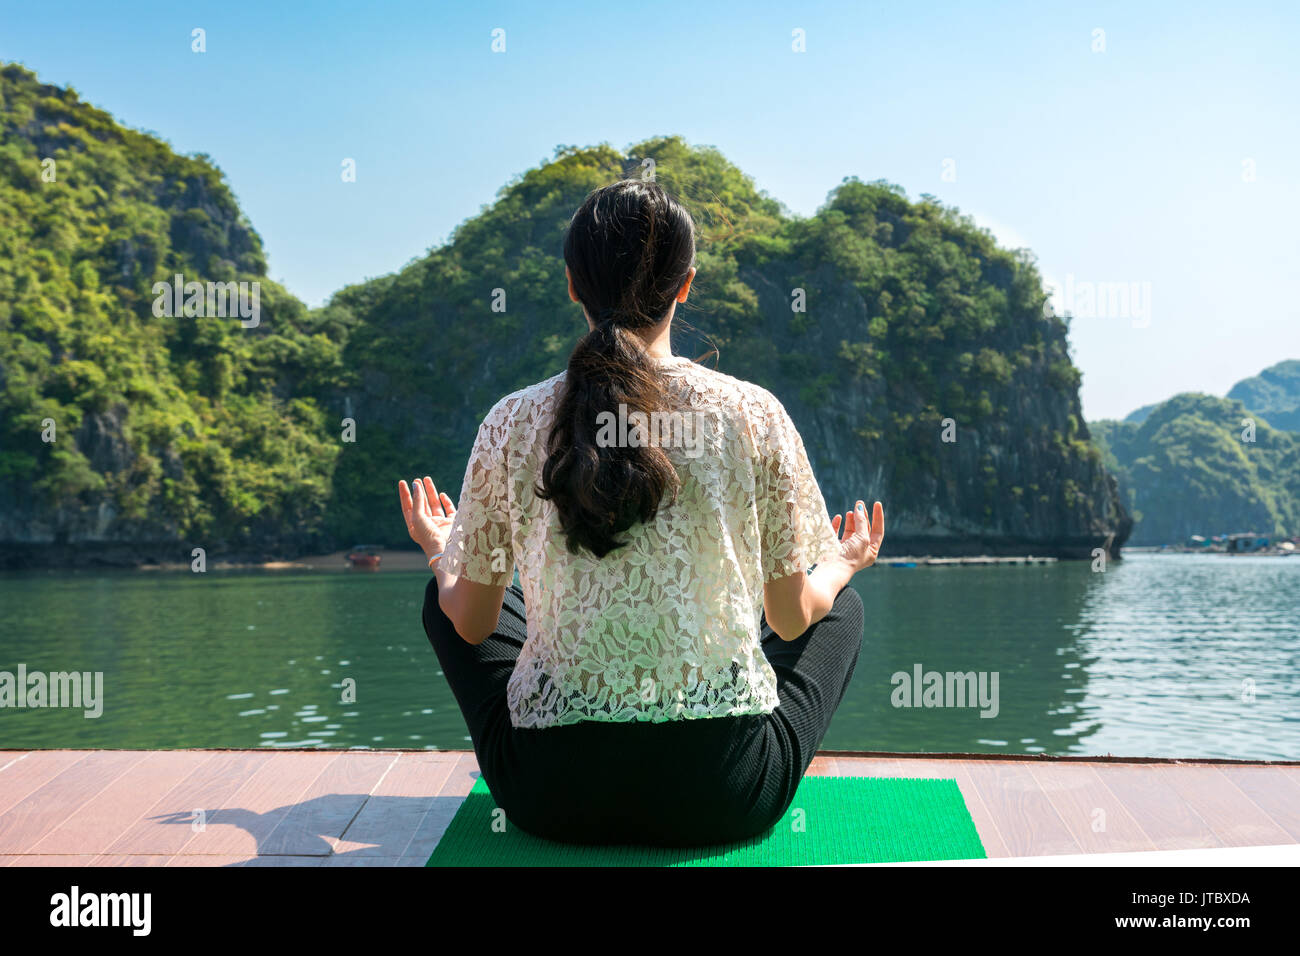 Girl meditating on a cruise boat deck Stock Photo